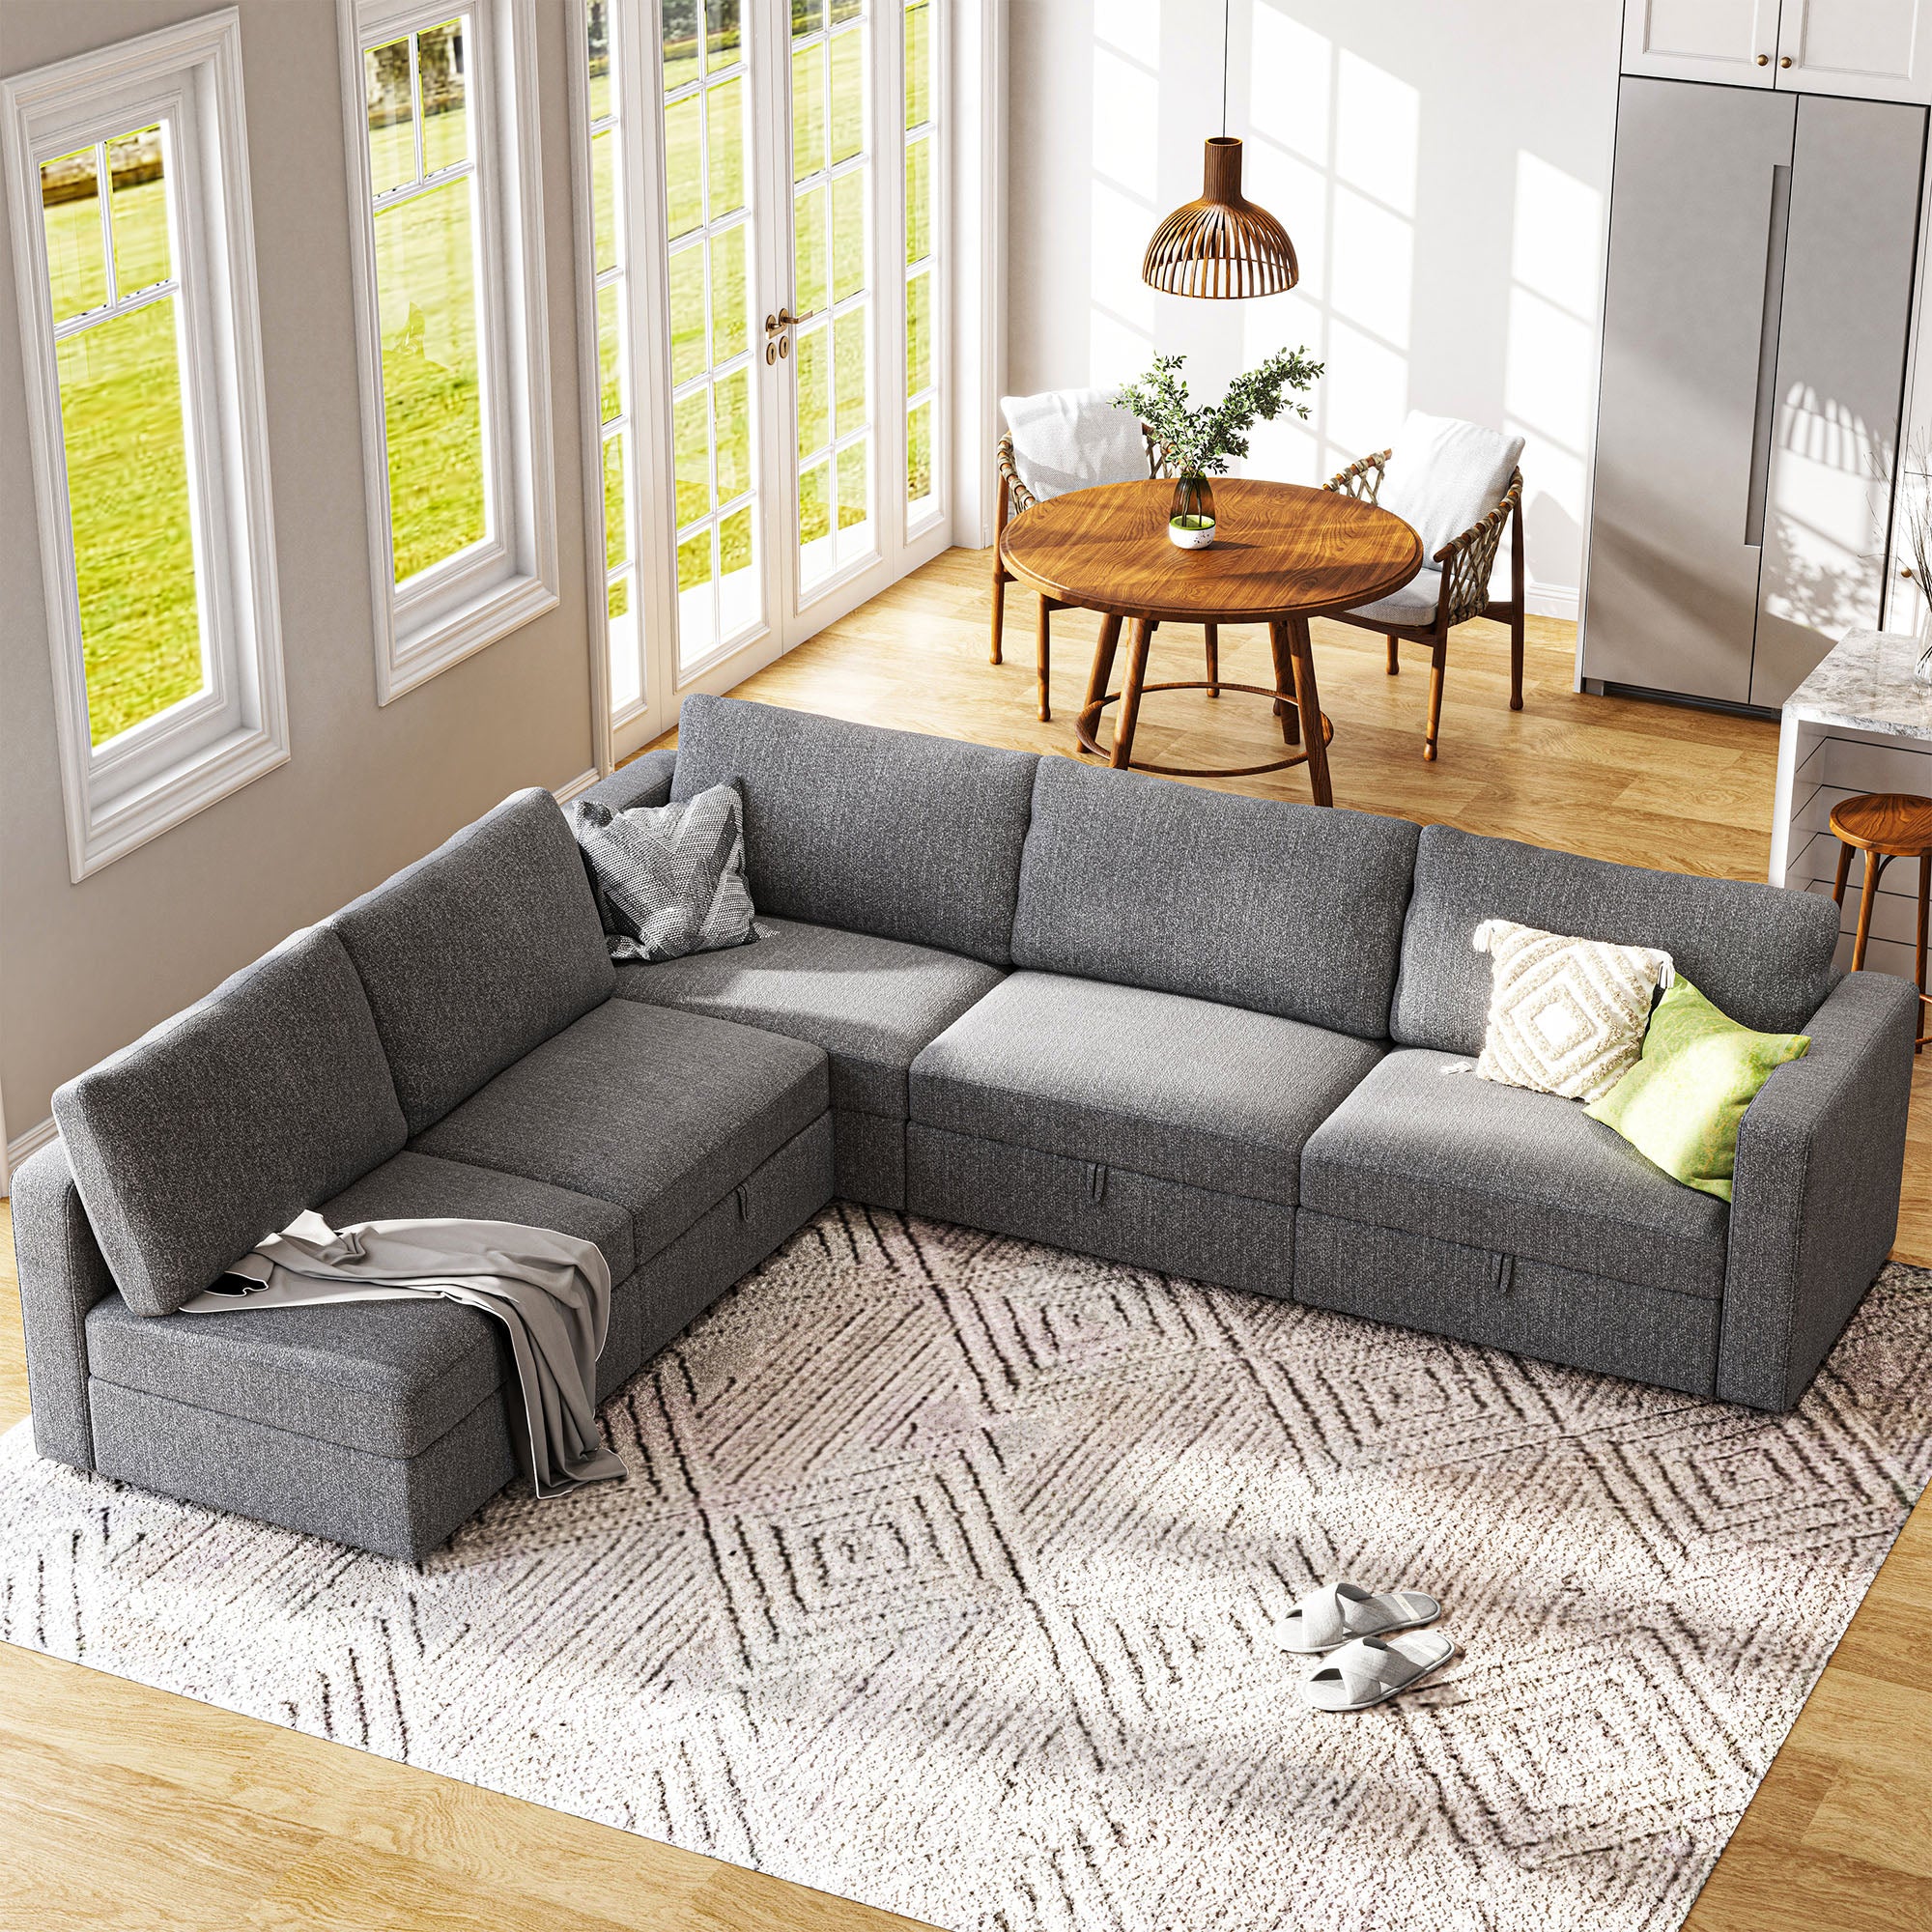 Urban 3 Piece L-Shaped Sectional, Sofa With Chaise